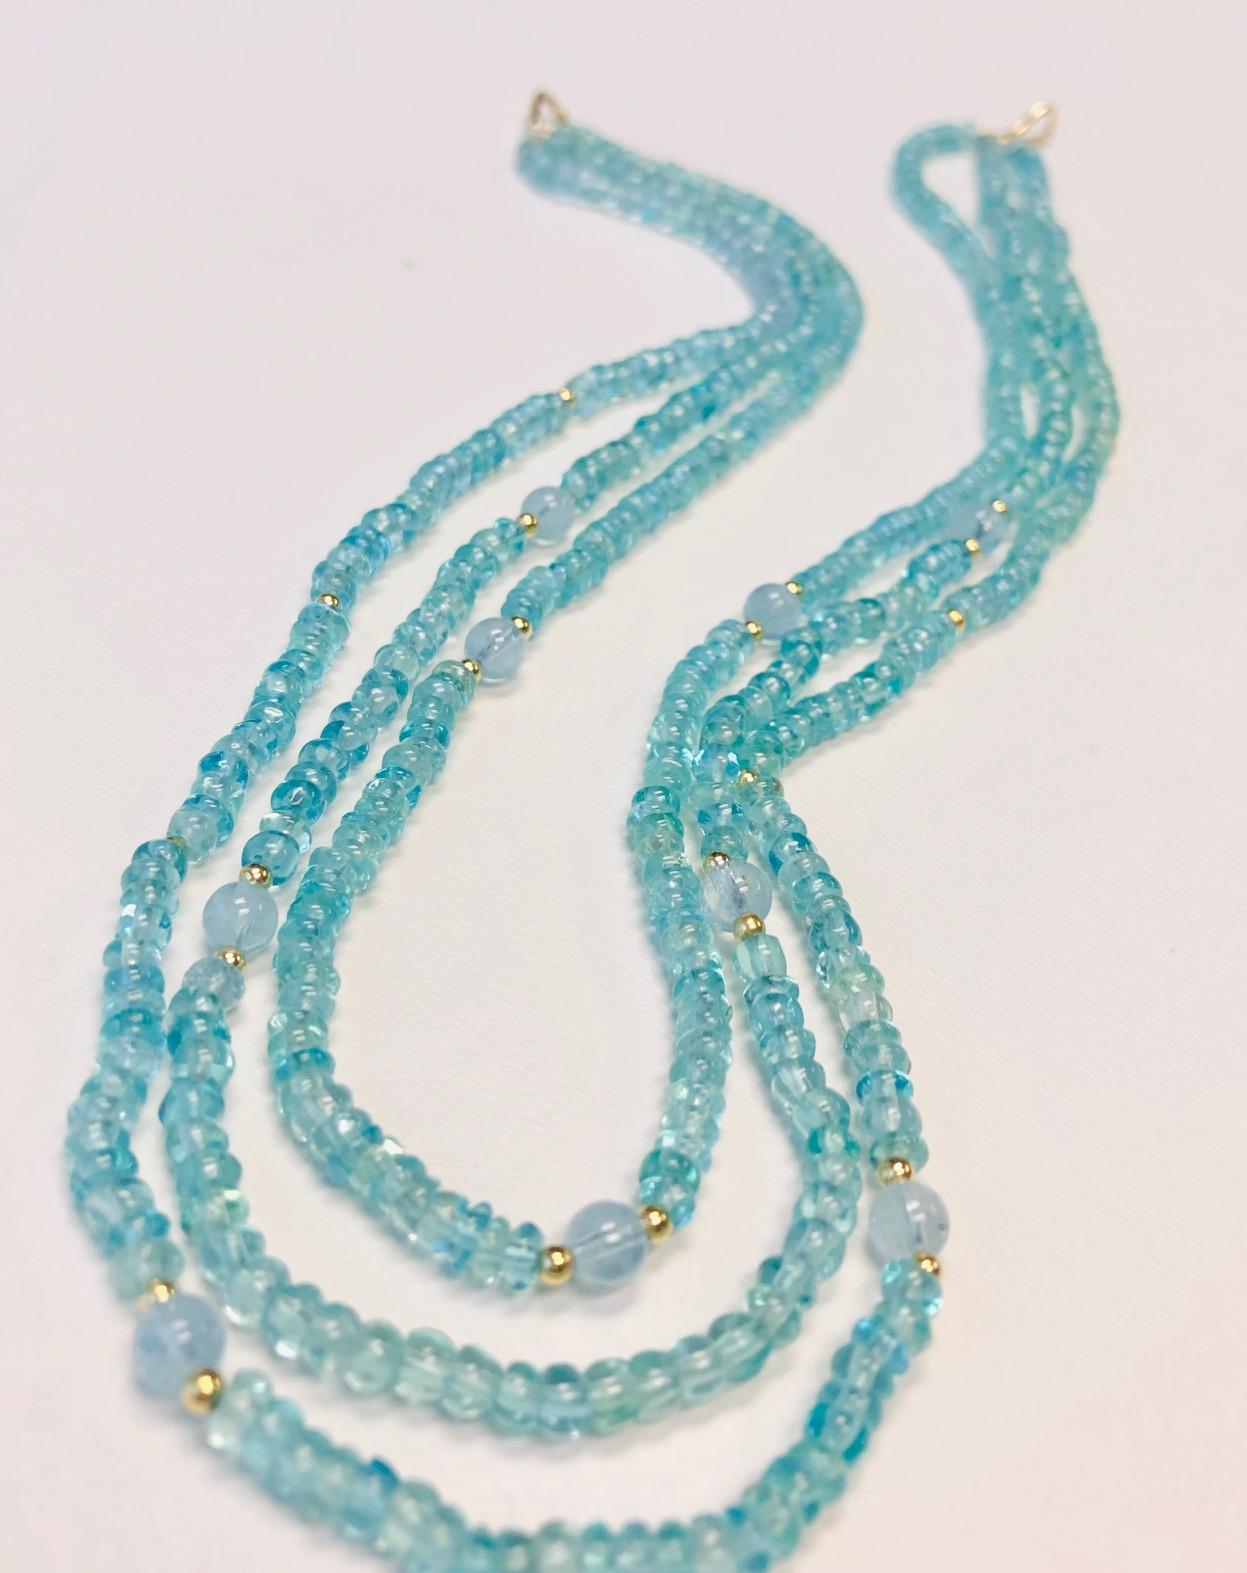 Triple Strand Apatite, Aquamarine Beaded Nesting Necklace, Yellow Gold Accents 3